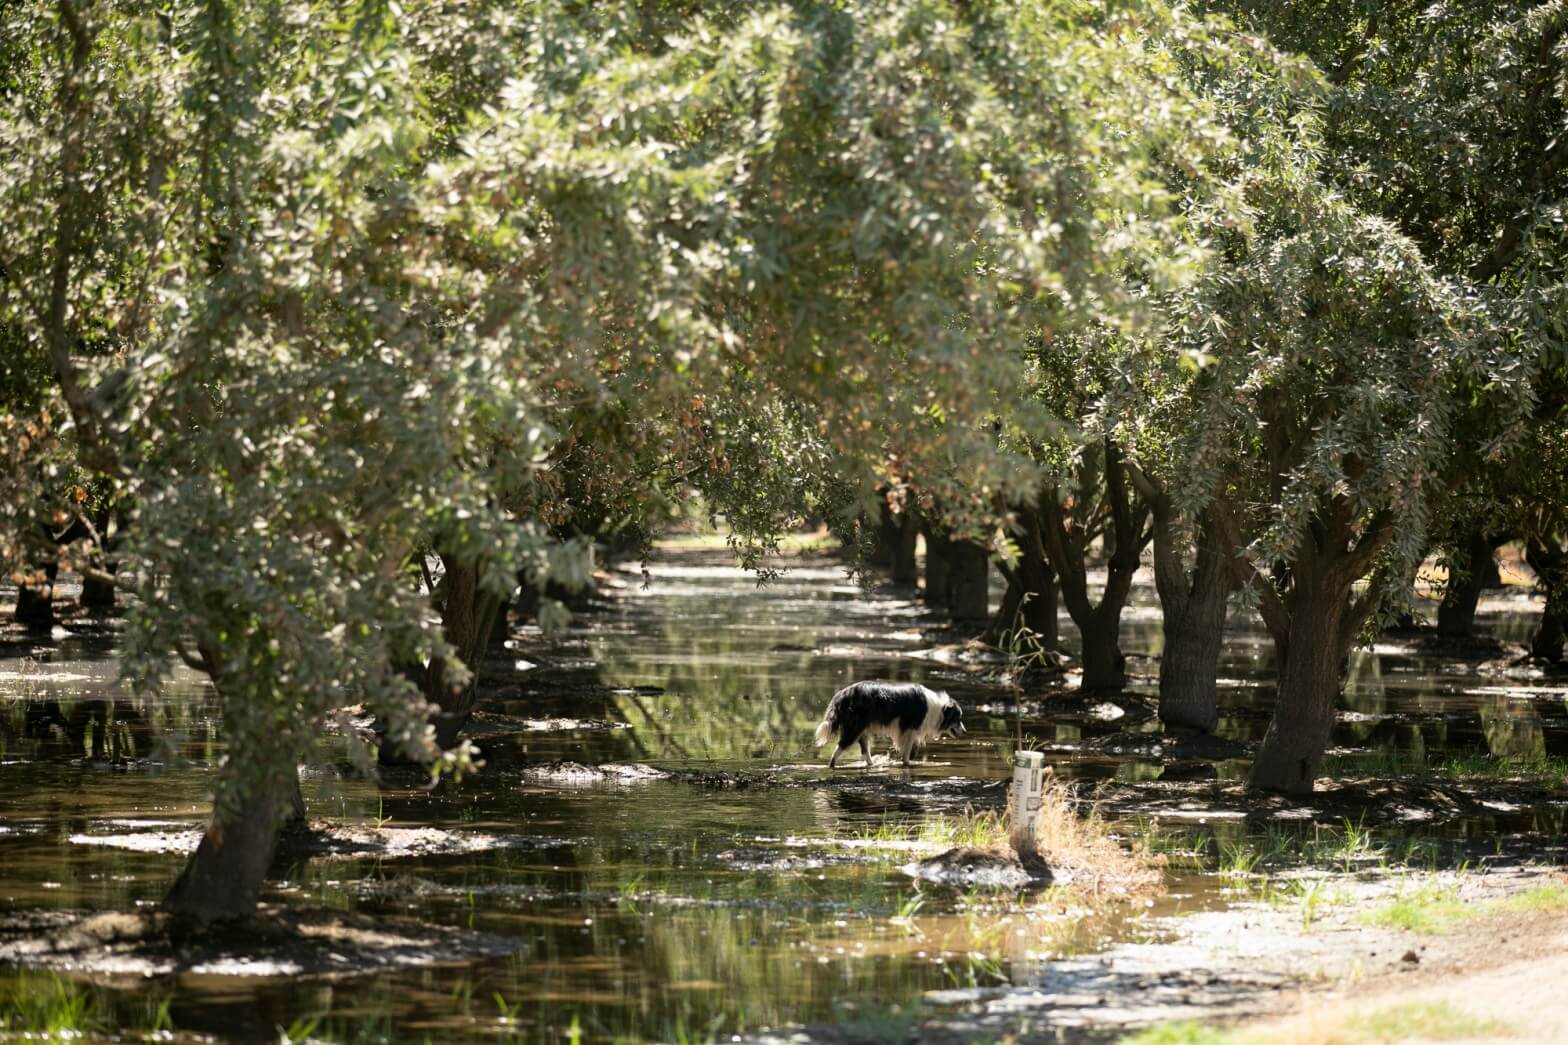 One of Gemperle’s border collies trudges through puddles on the almond grove of a neighbor who continues to use flood irrigation. Gemperle switched to more efficient micro-drip irrigation years ago.